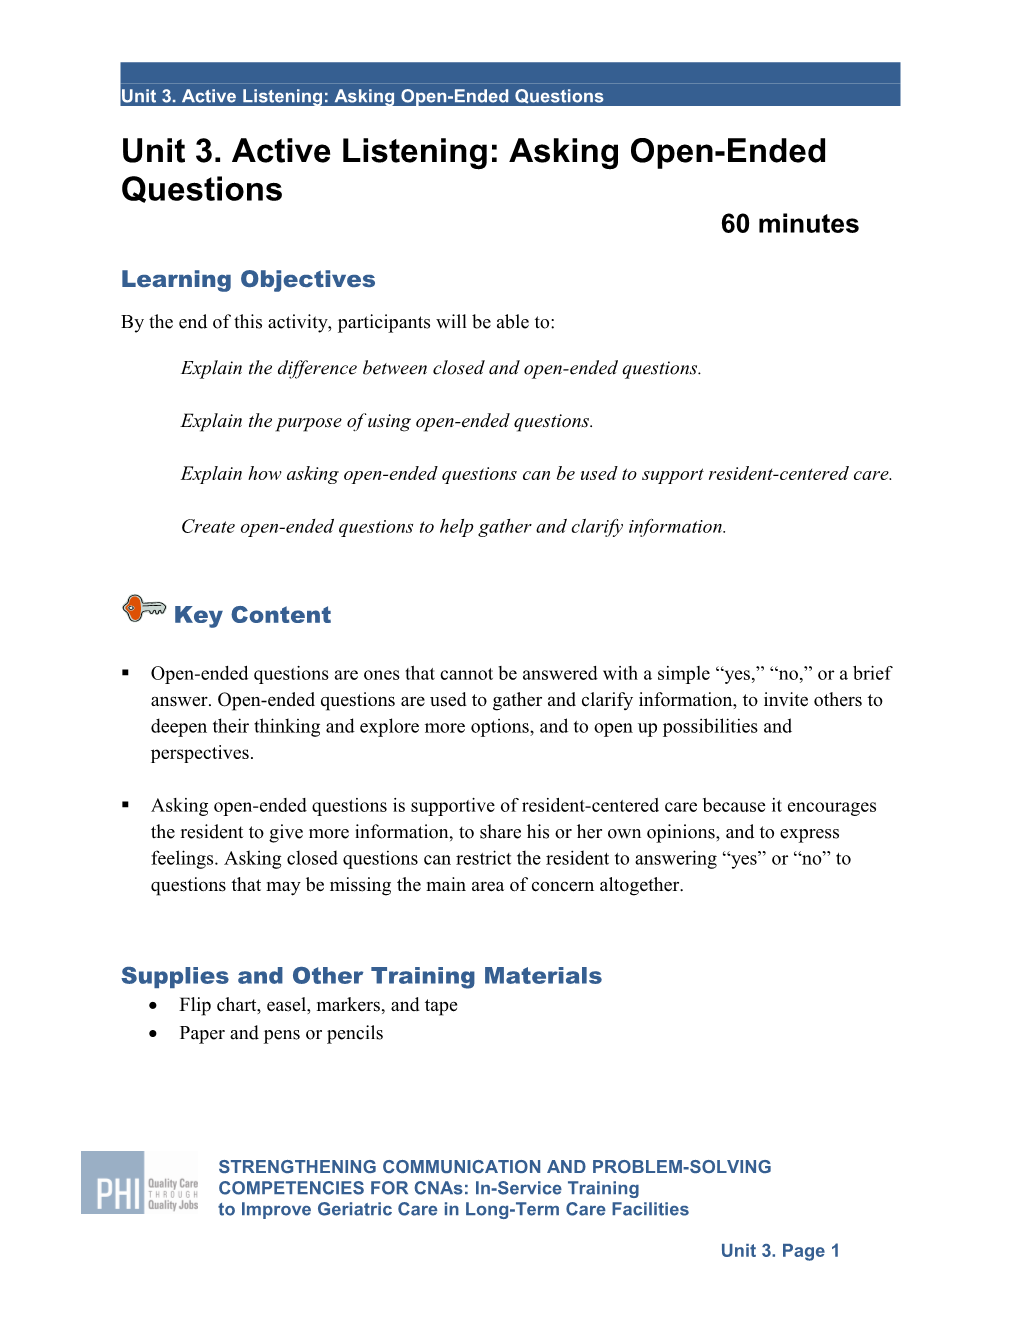 Unit 3. Active Listening: Asking Open-Ended Questions